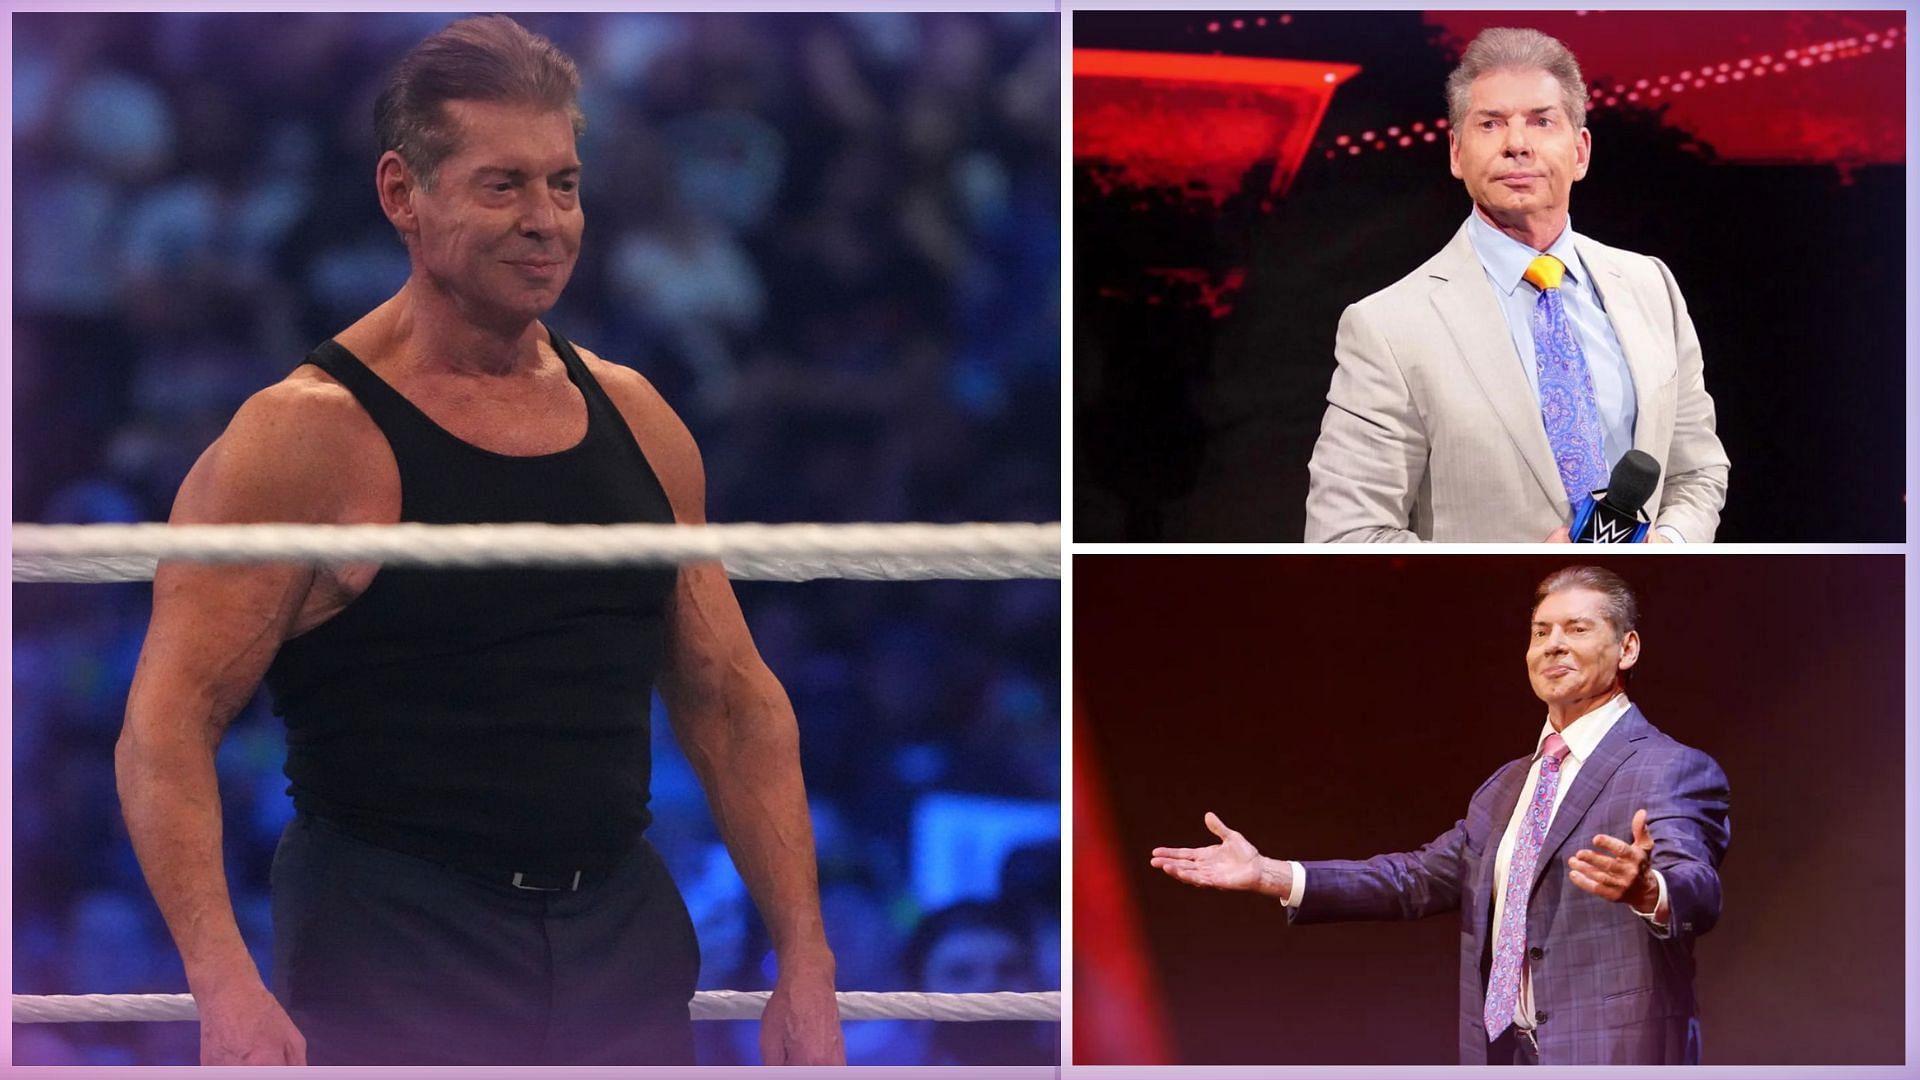 Vince McMahon is the former WWE CEO.